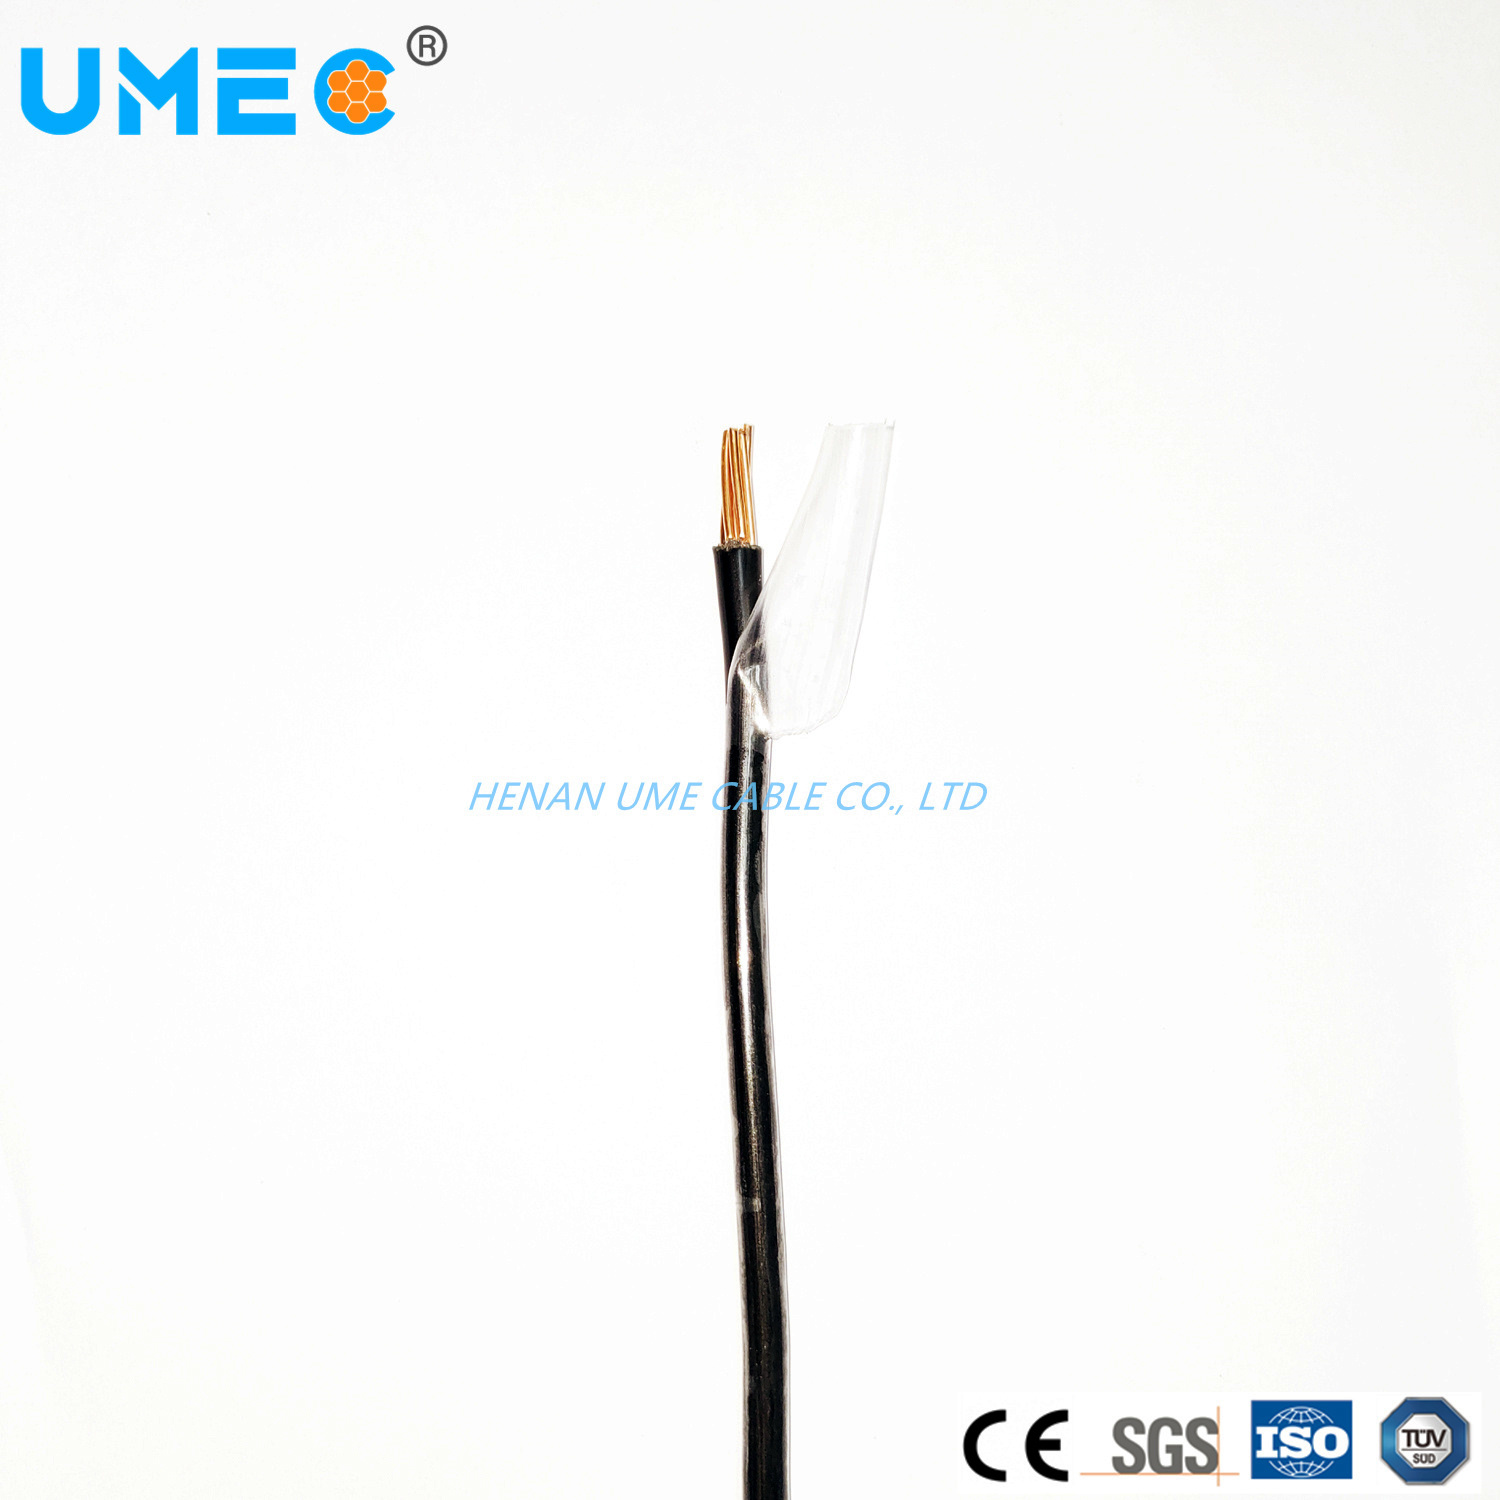 Thermoplastic Heat and Water-Resistant PVC Insulation Nylon-Coated Thwn Wire